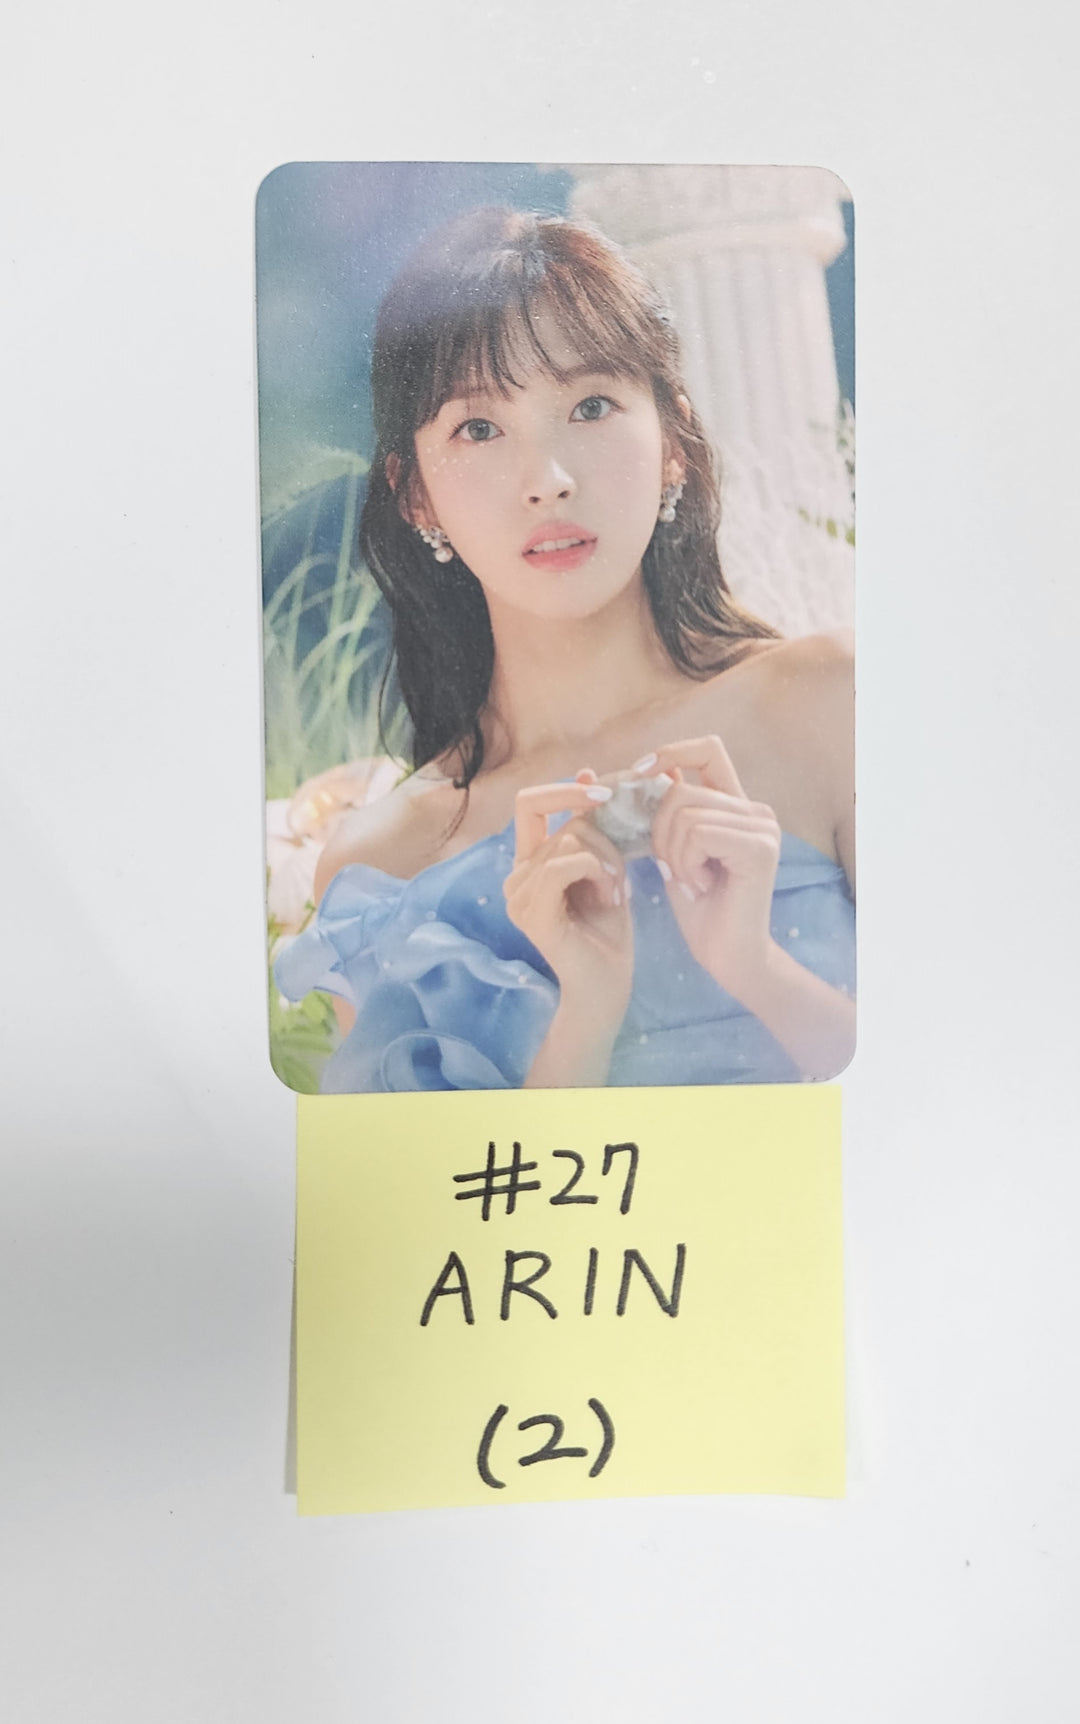 Oh My Girl "Golden Hourglass" - Official Photocard, Ticket